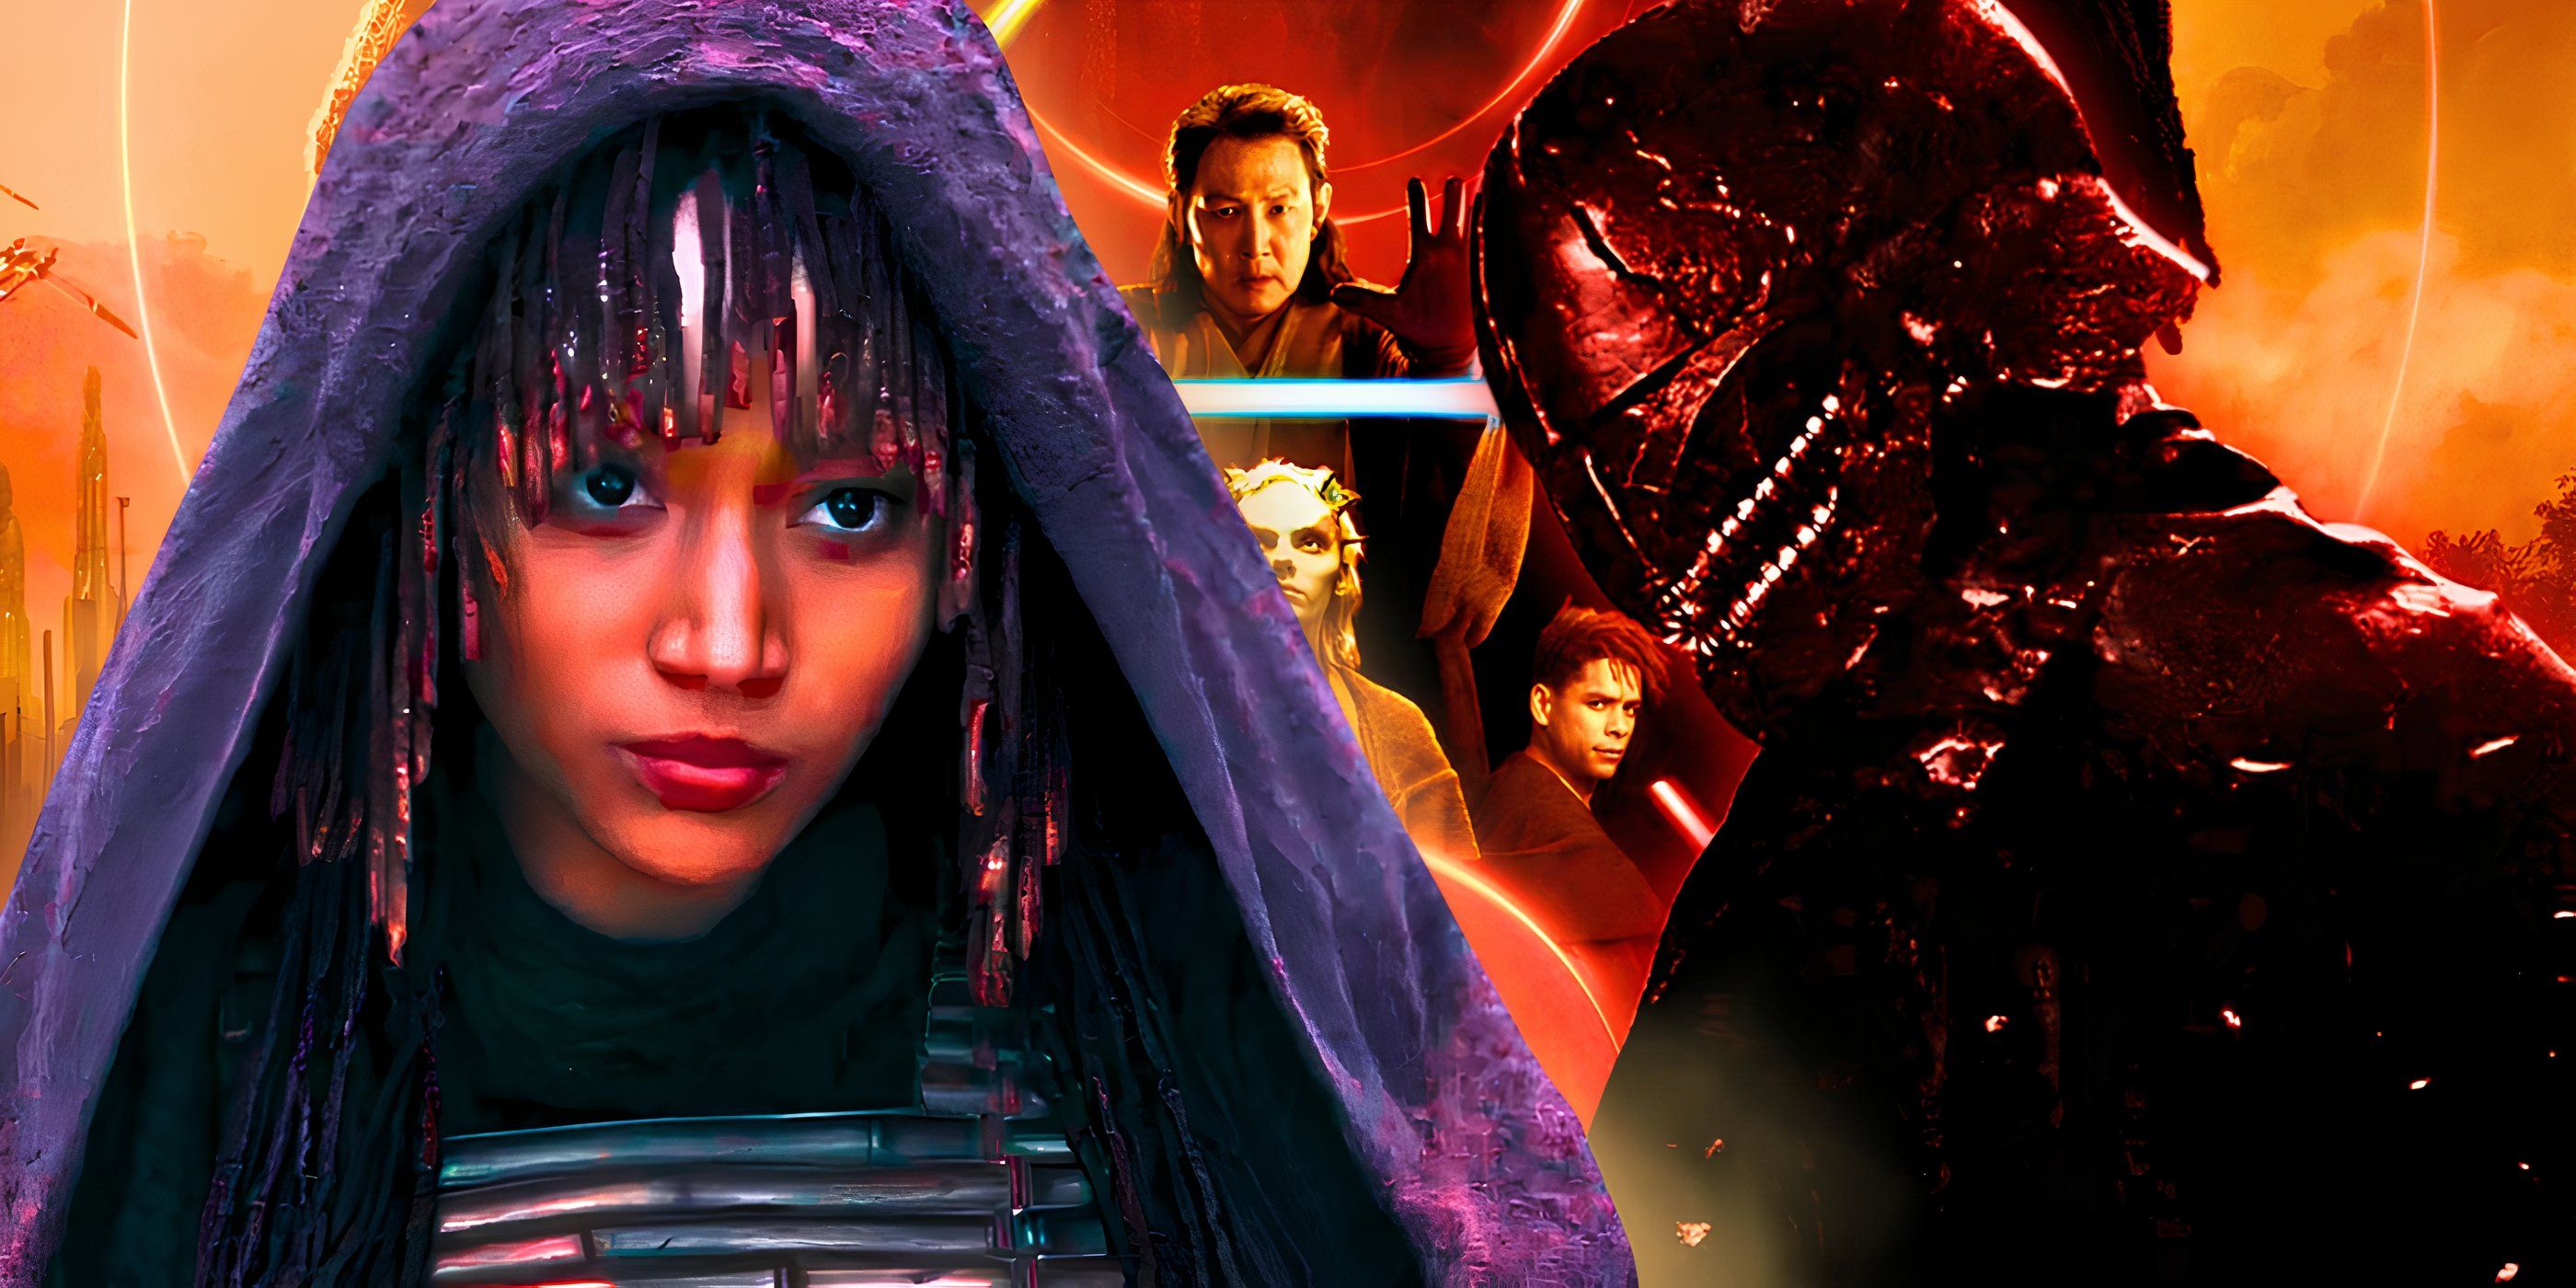 Amandla Stenberg as Mae from The Acolyte next to the mysterious Sith warrior